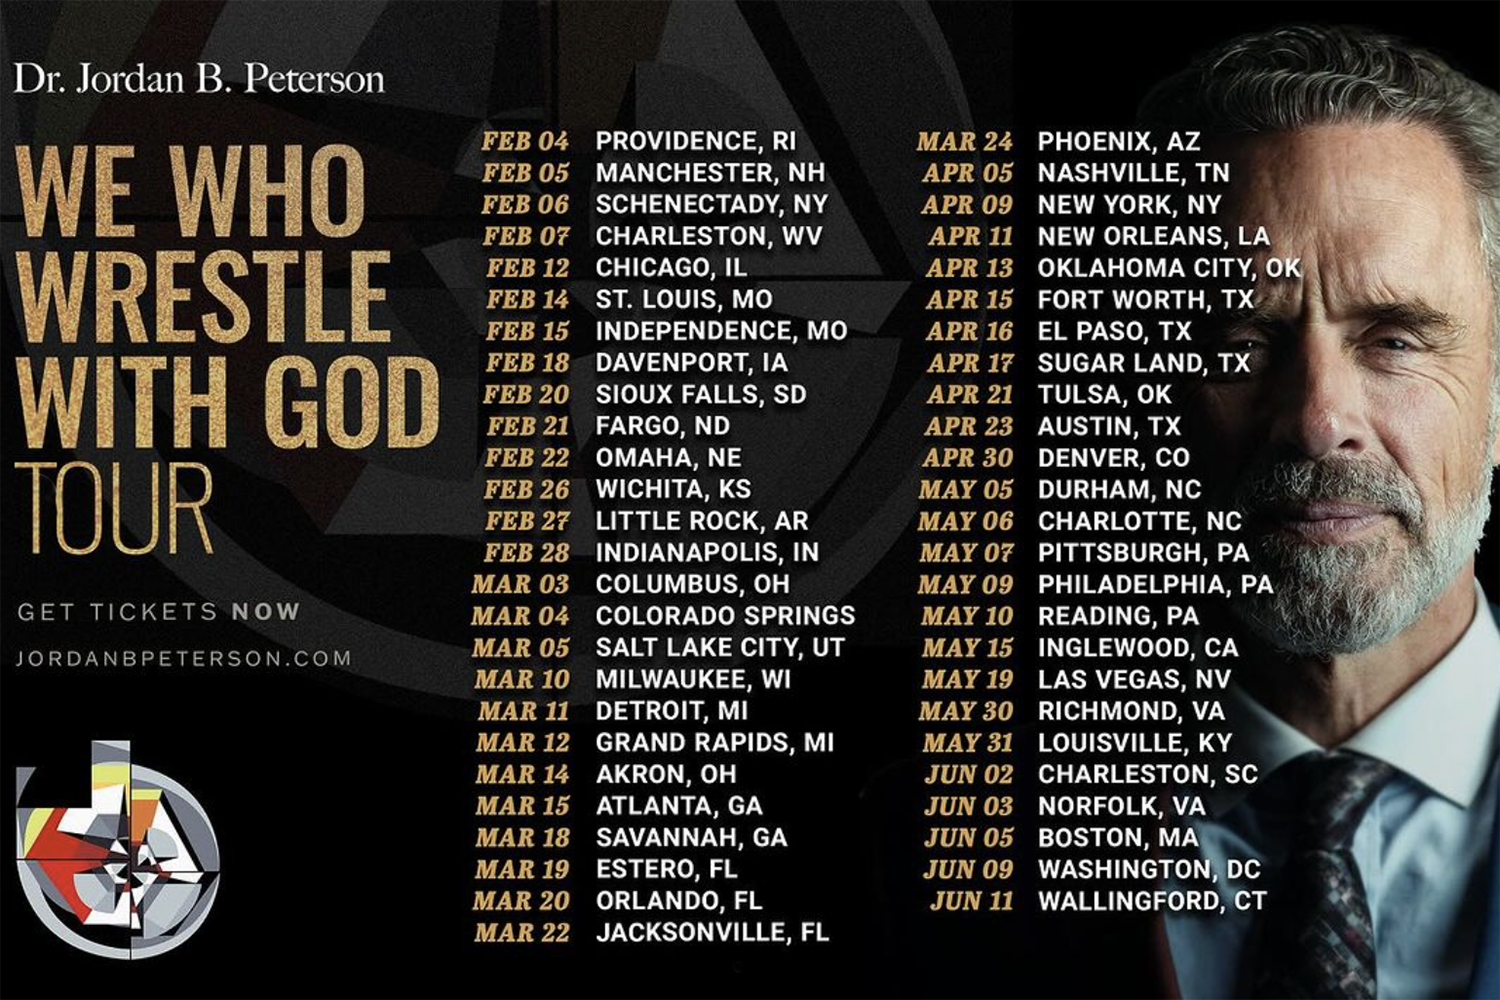 Schedule for the Jordan Peterson "We Who Wrestle With God Tour." (Courtesy image)